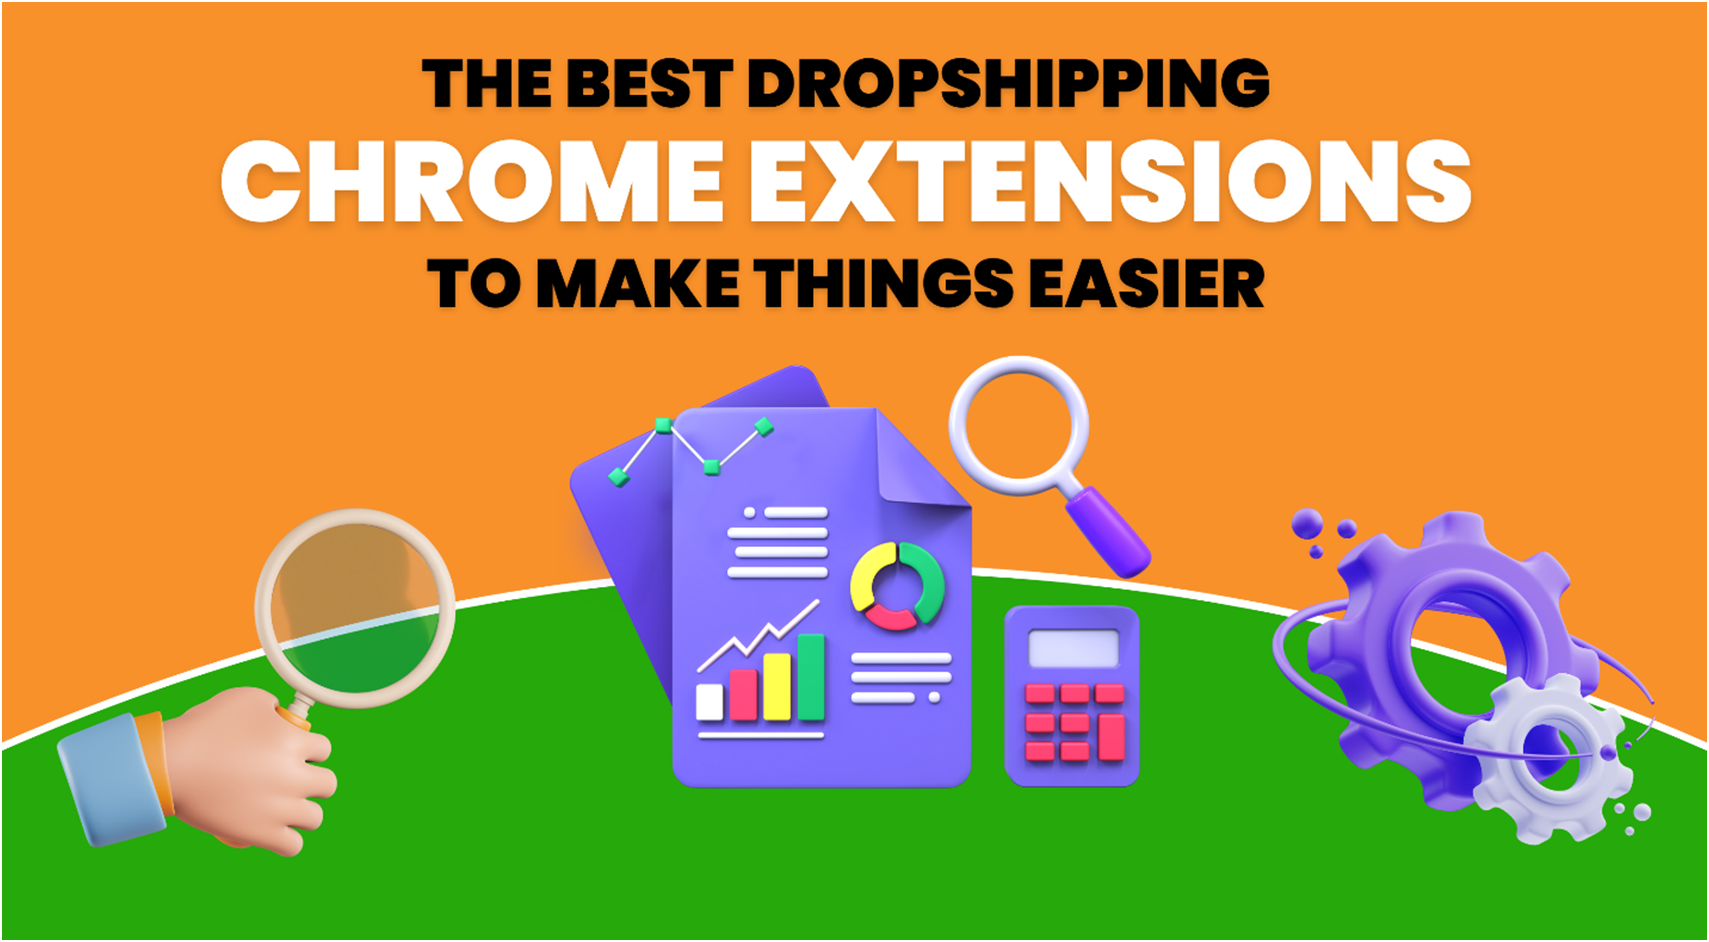 The Best Dropshipping Chrome Extensions to Make Things Easier